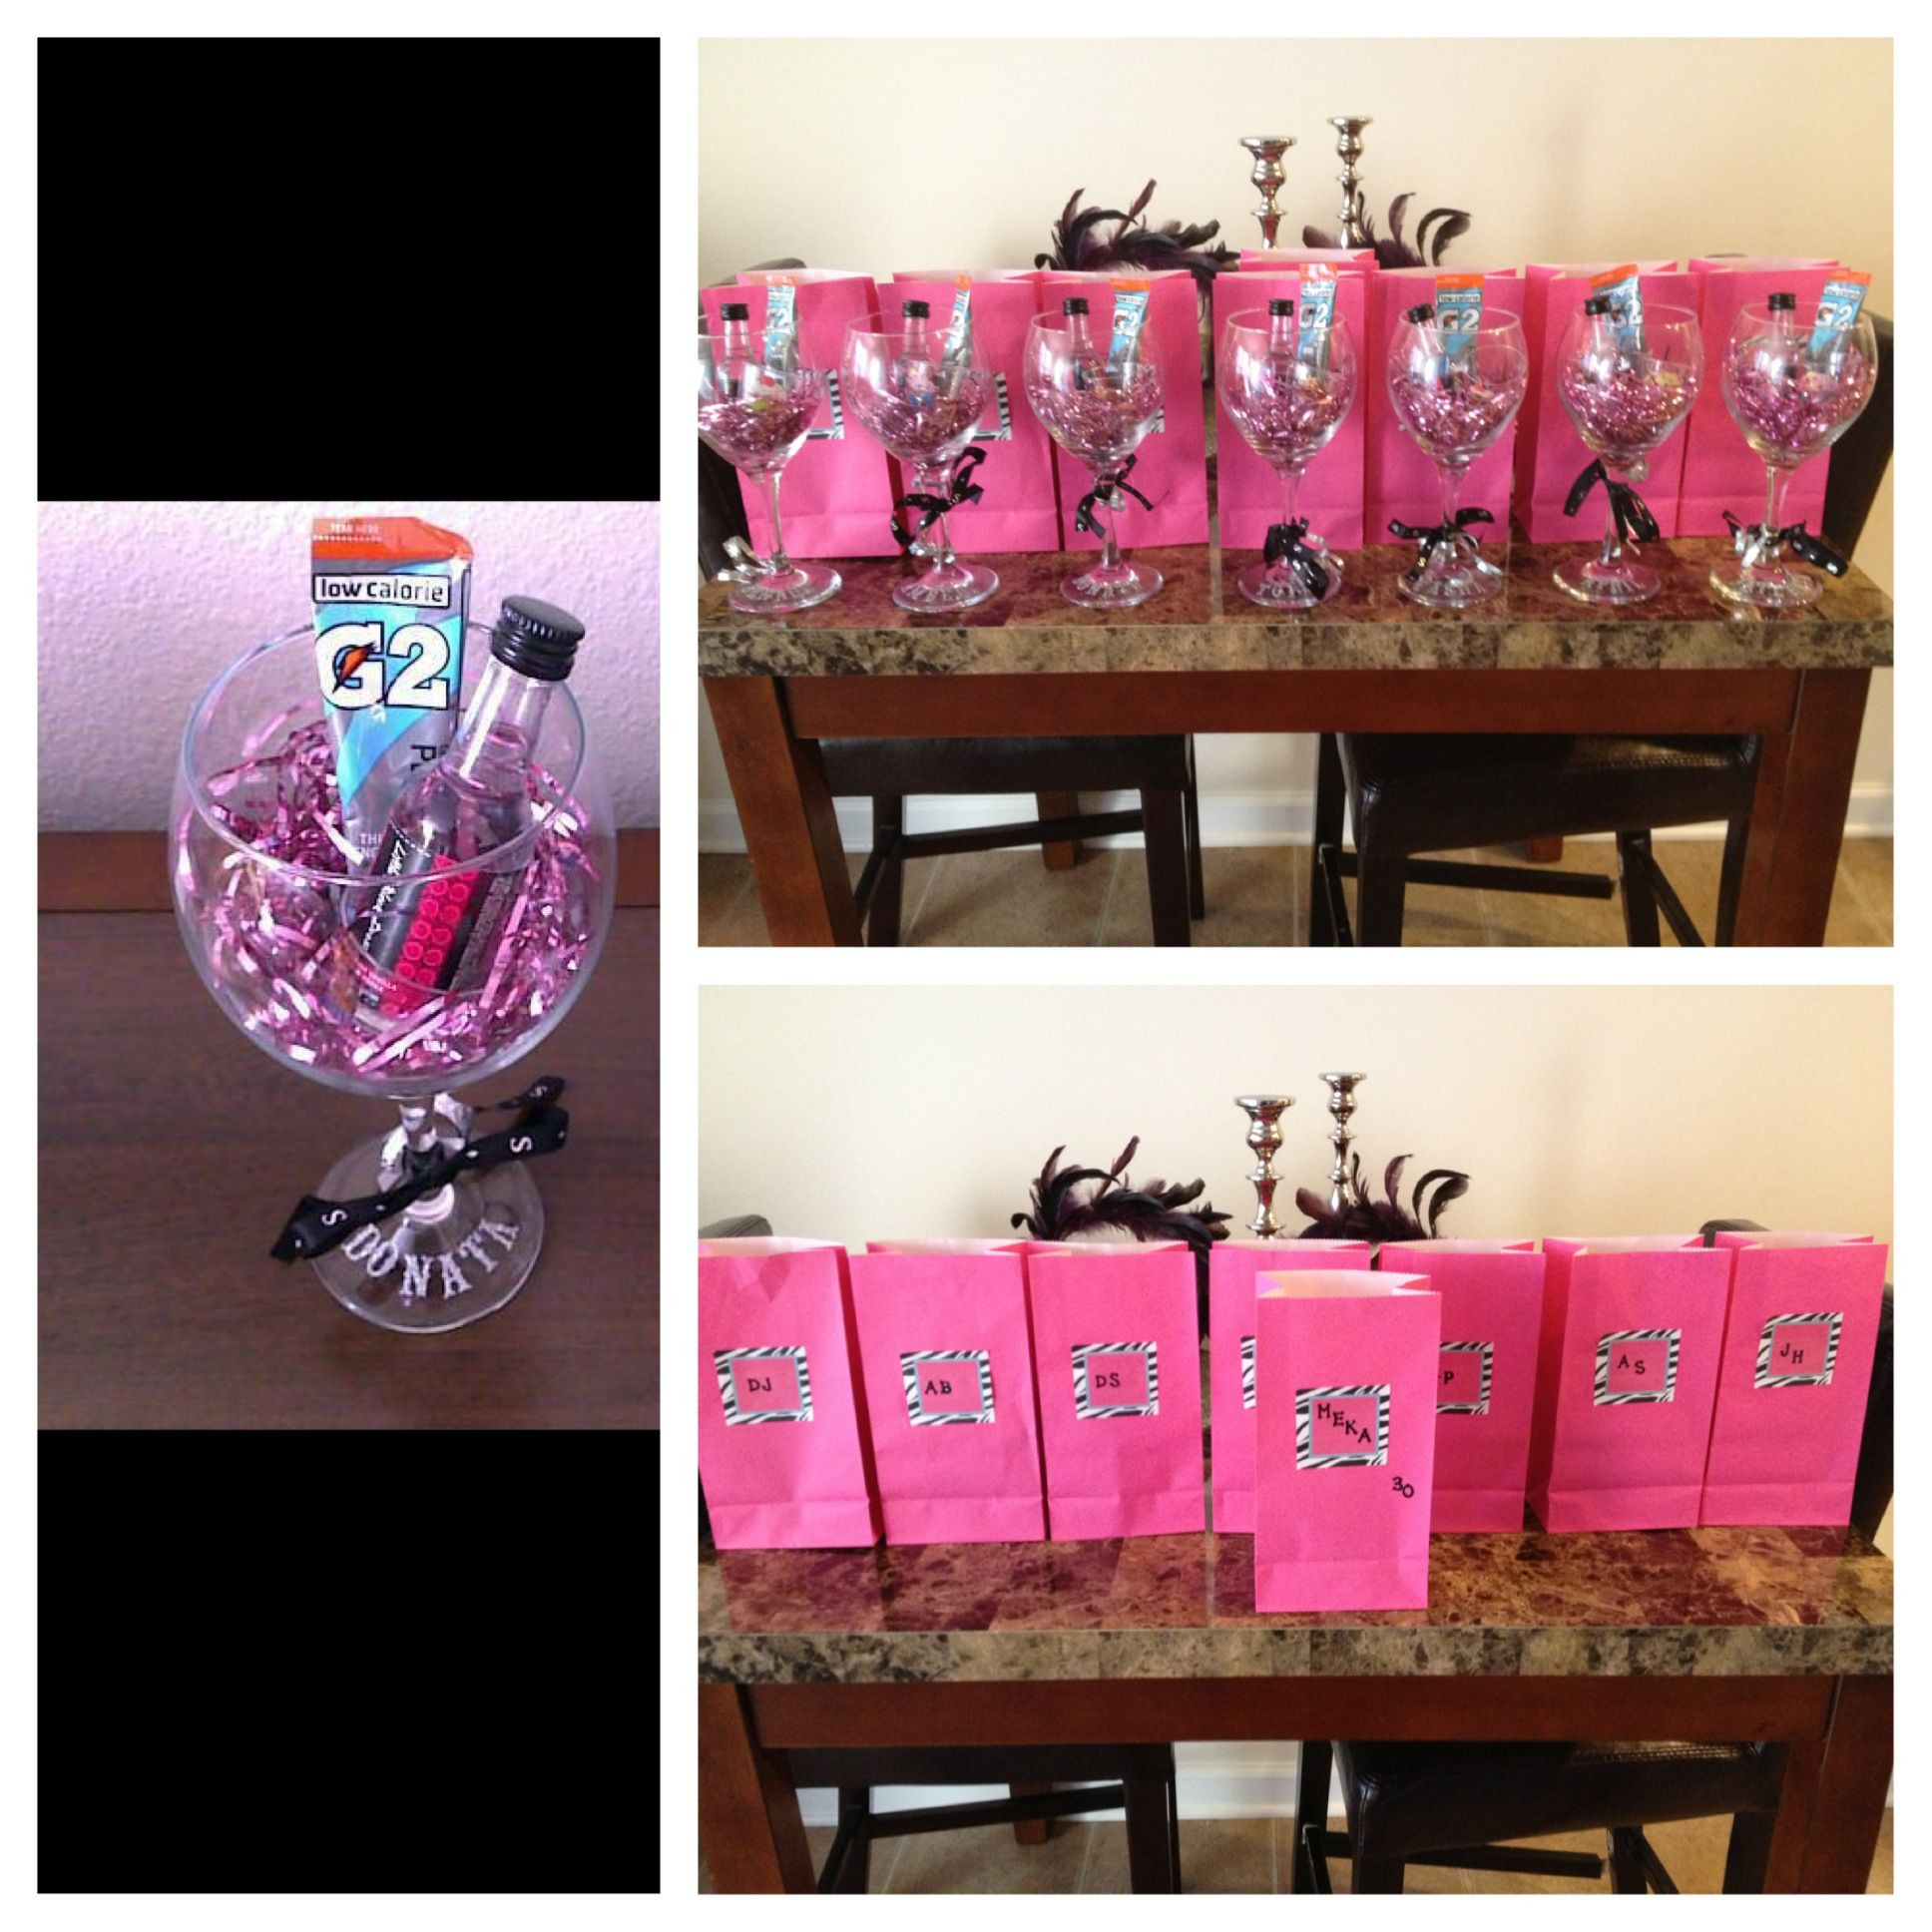 Girls Weekend Gift Ideas
 Thank you ts for a girls trip